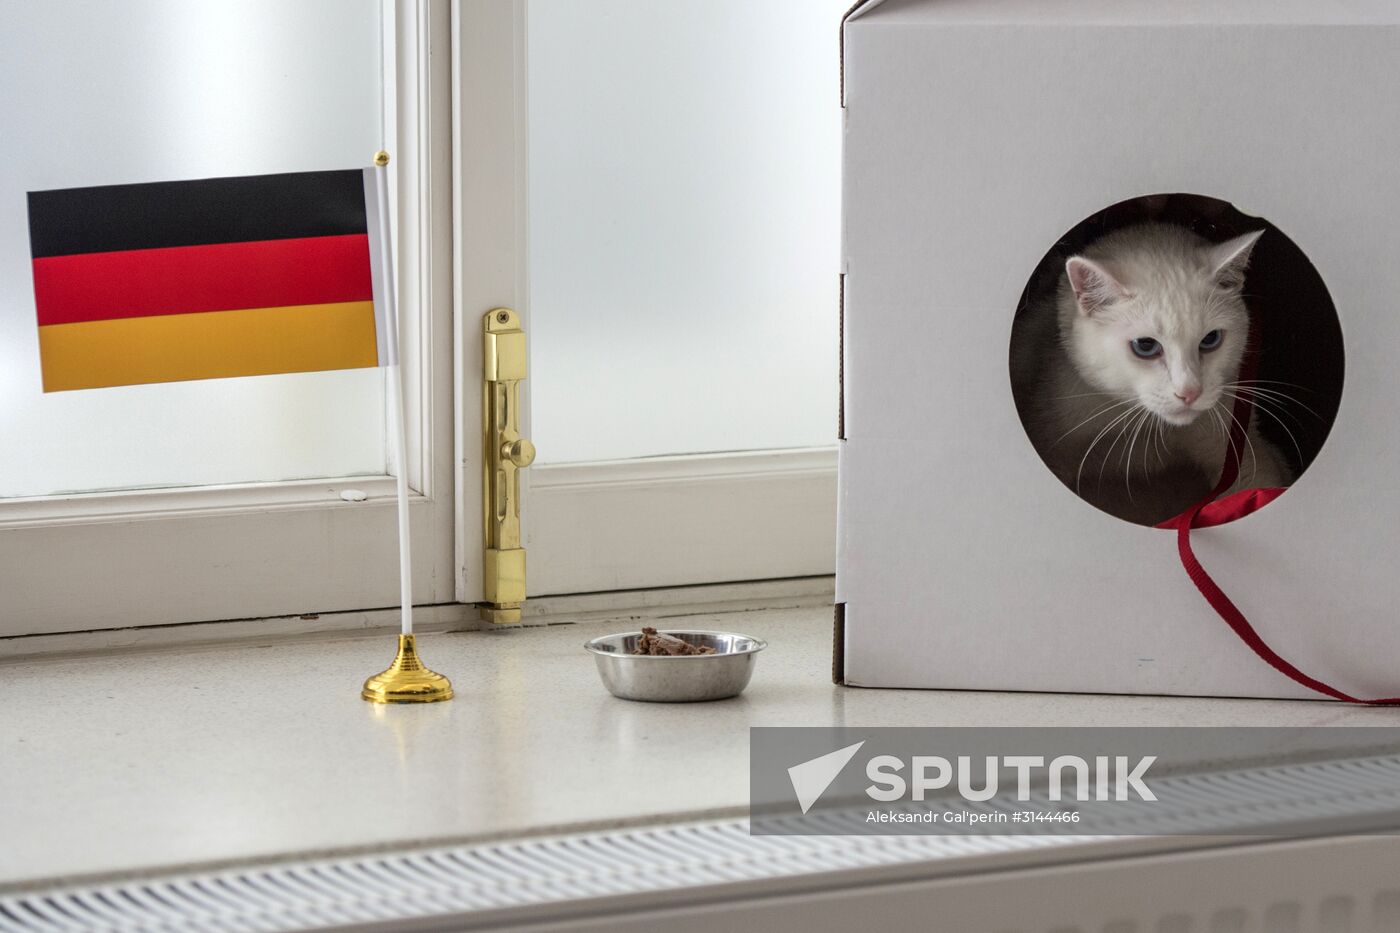 Psychic cat predicts Germany's victory in 2017 Confederations Cup final against Chile